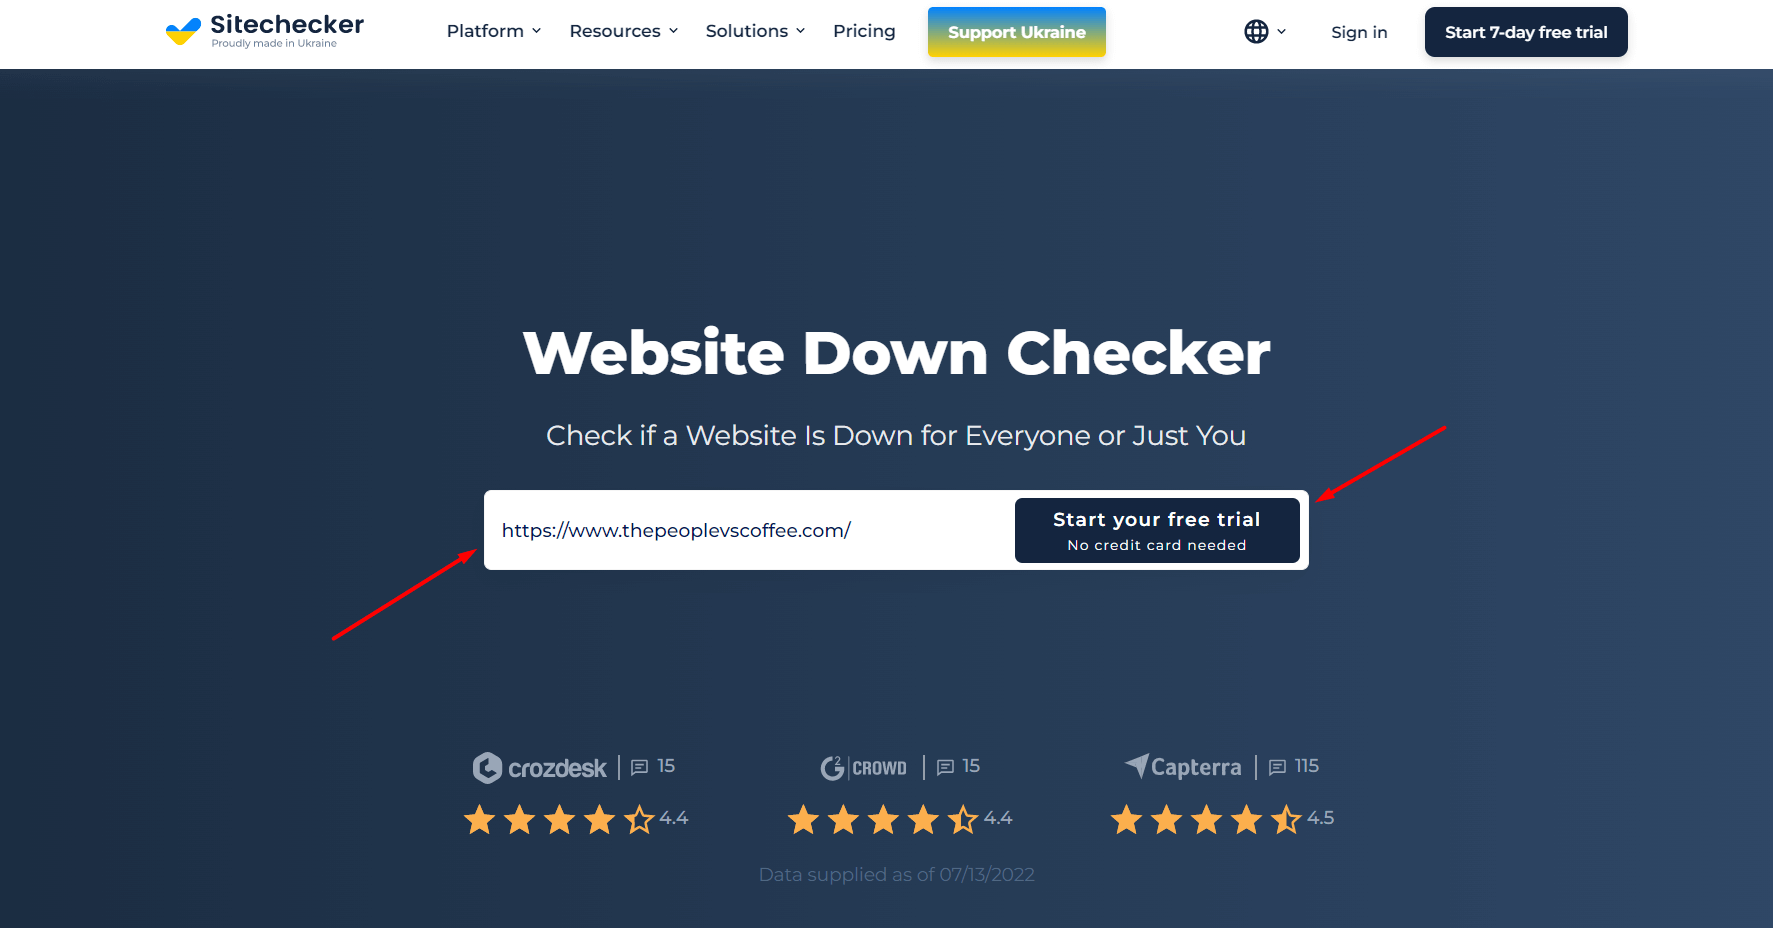 Is the website down for anyone else? I've been trying for 3 days